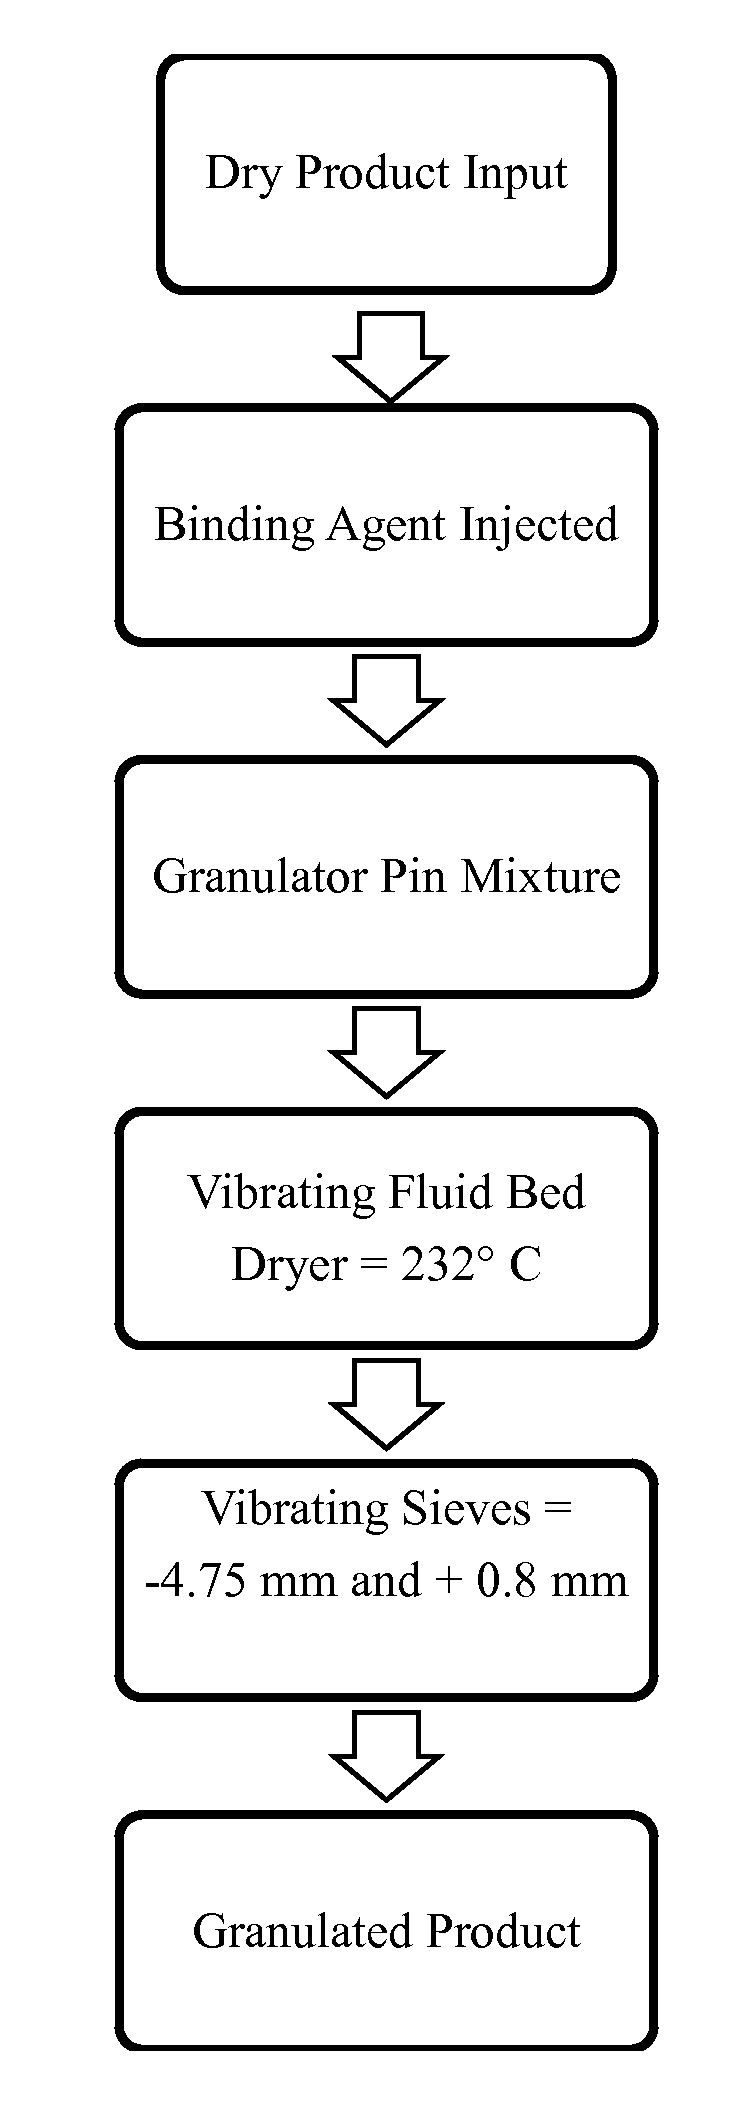 Value-added granulated organic fertilizer and process for producing the same